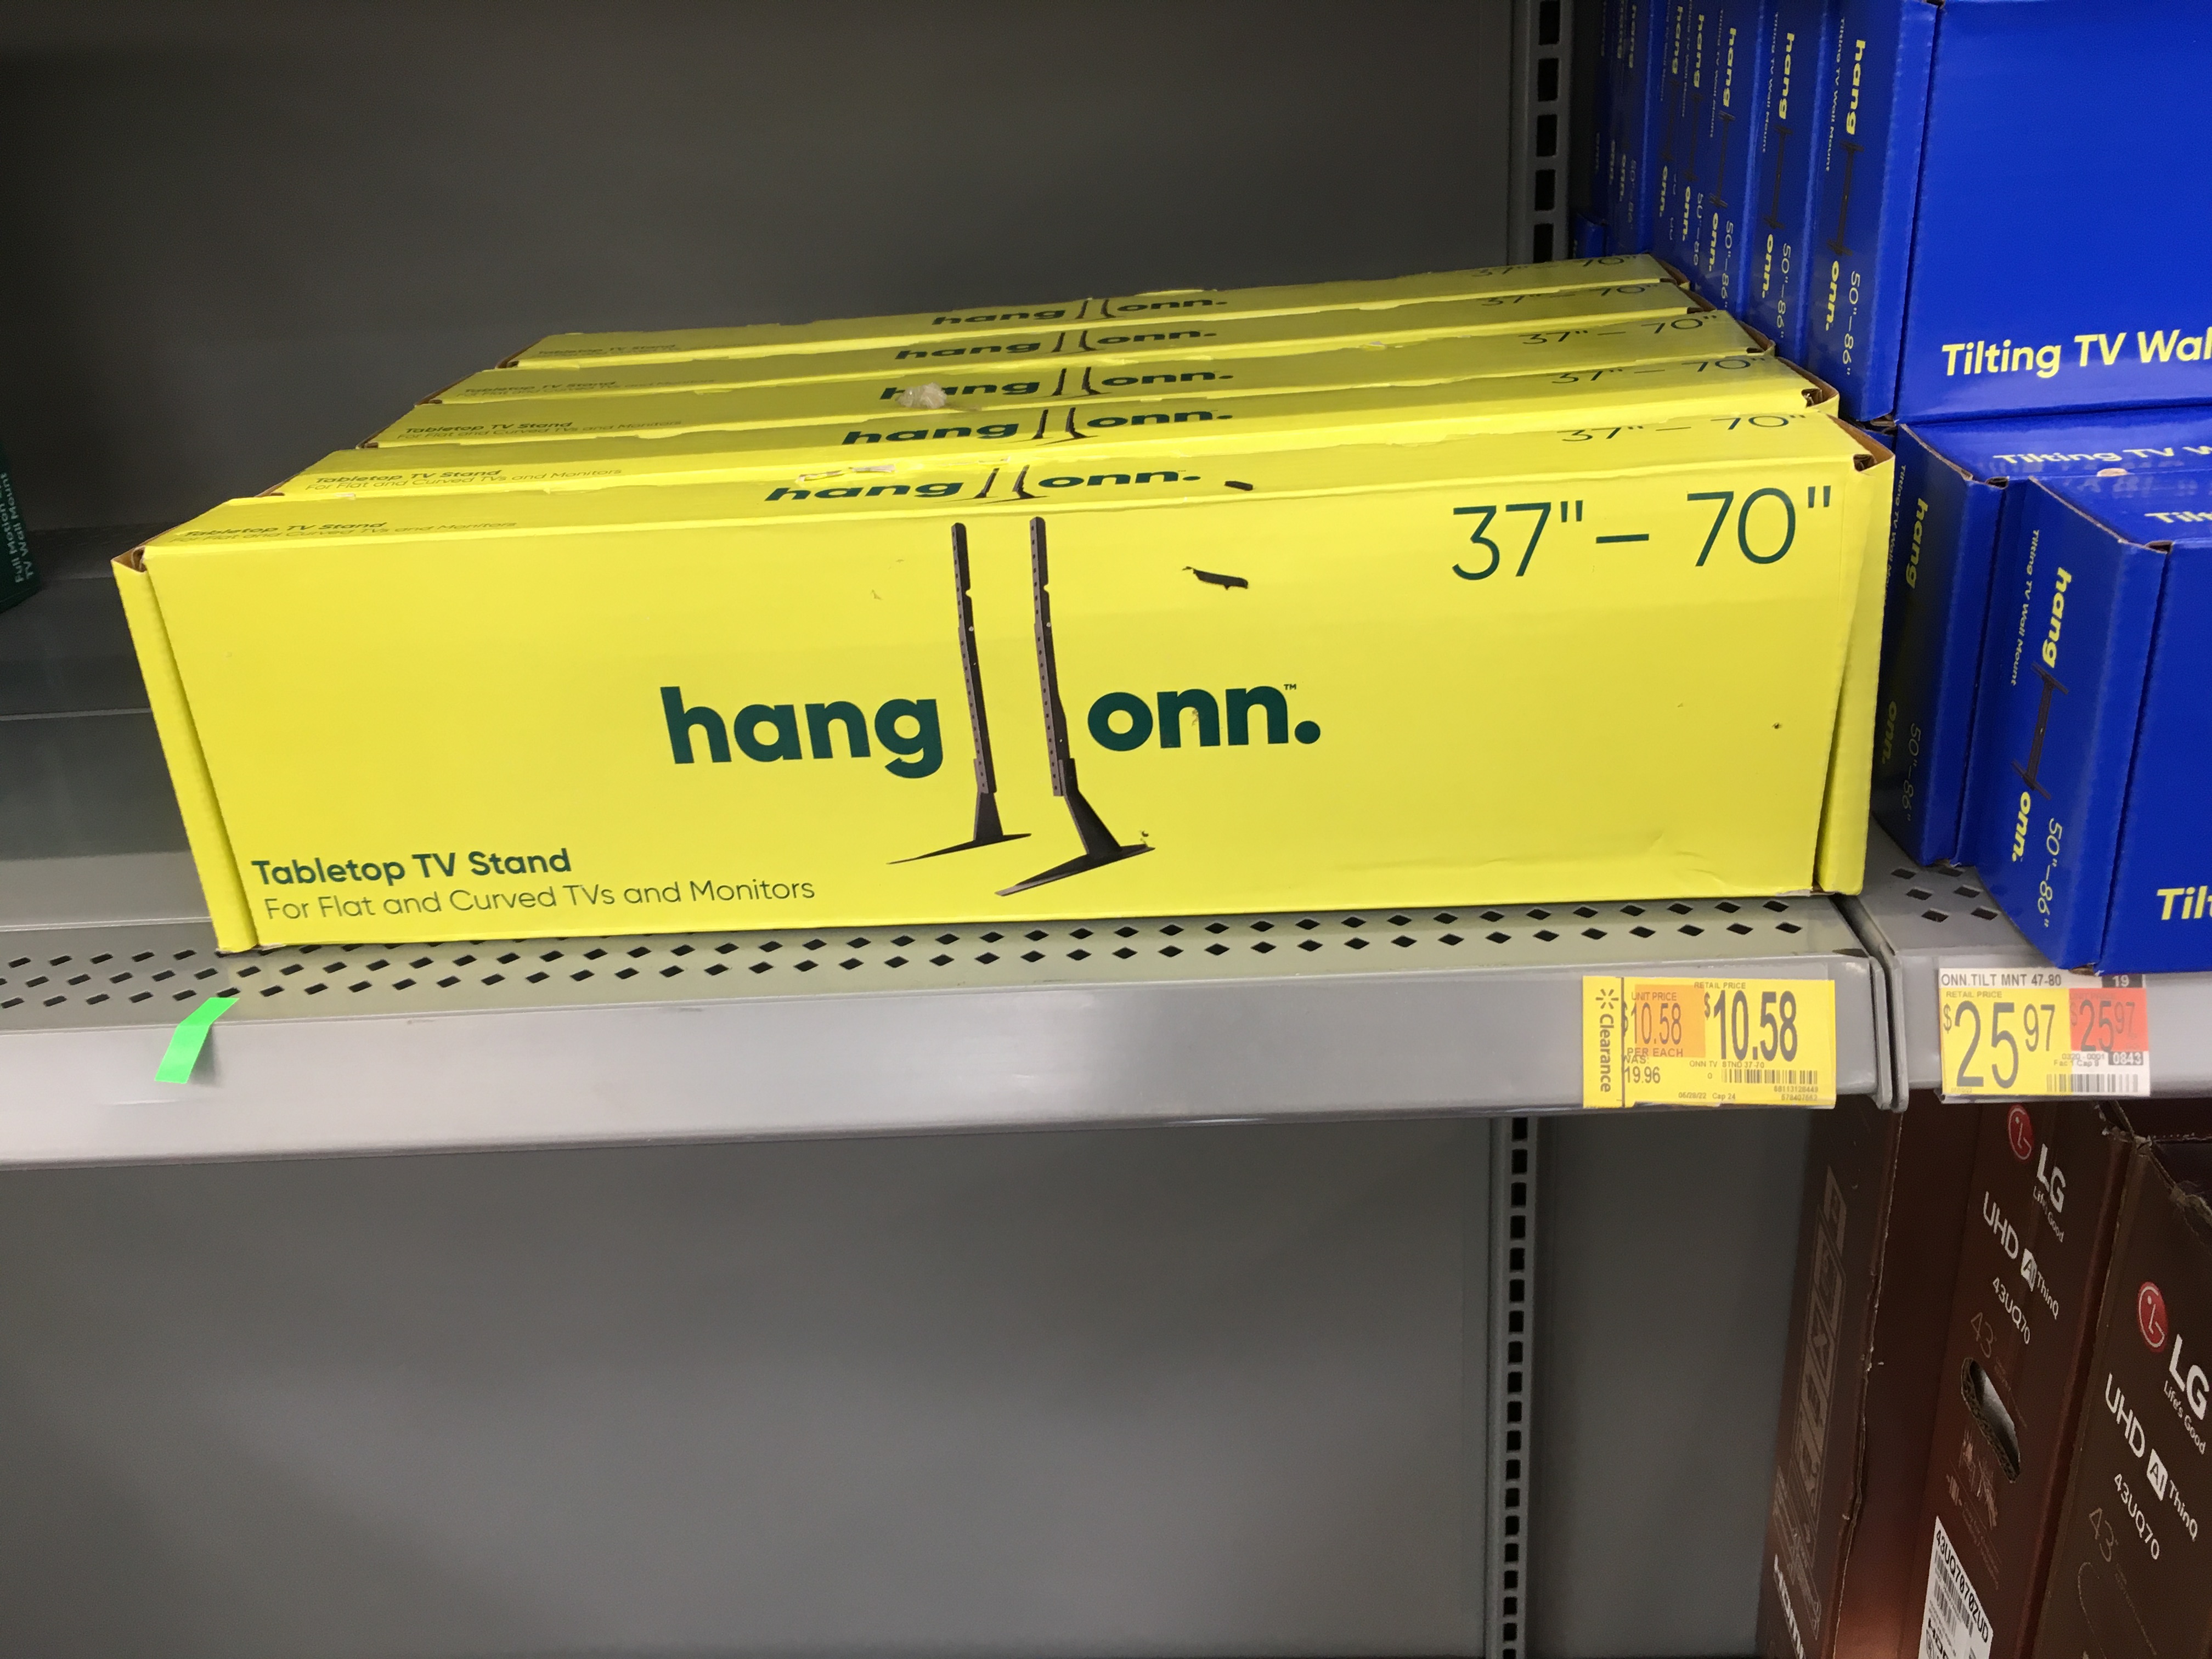 Shelf Tags are to LEFT – Every Walmart Shopper is Charged with Knowing That.